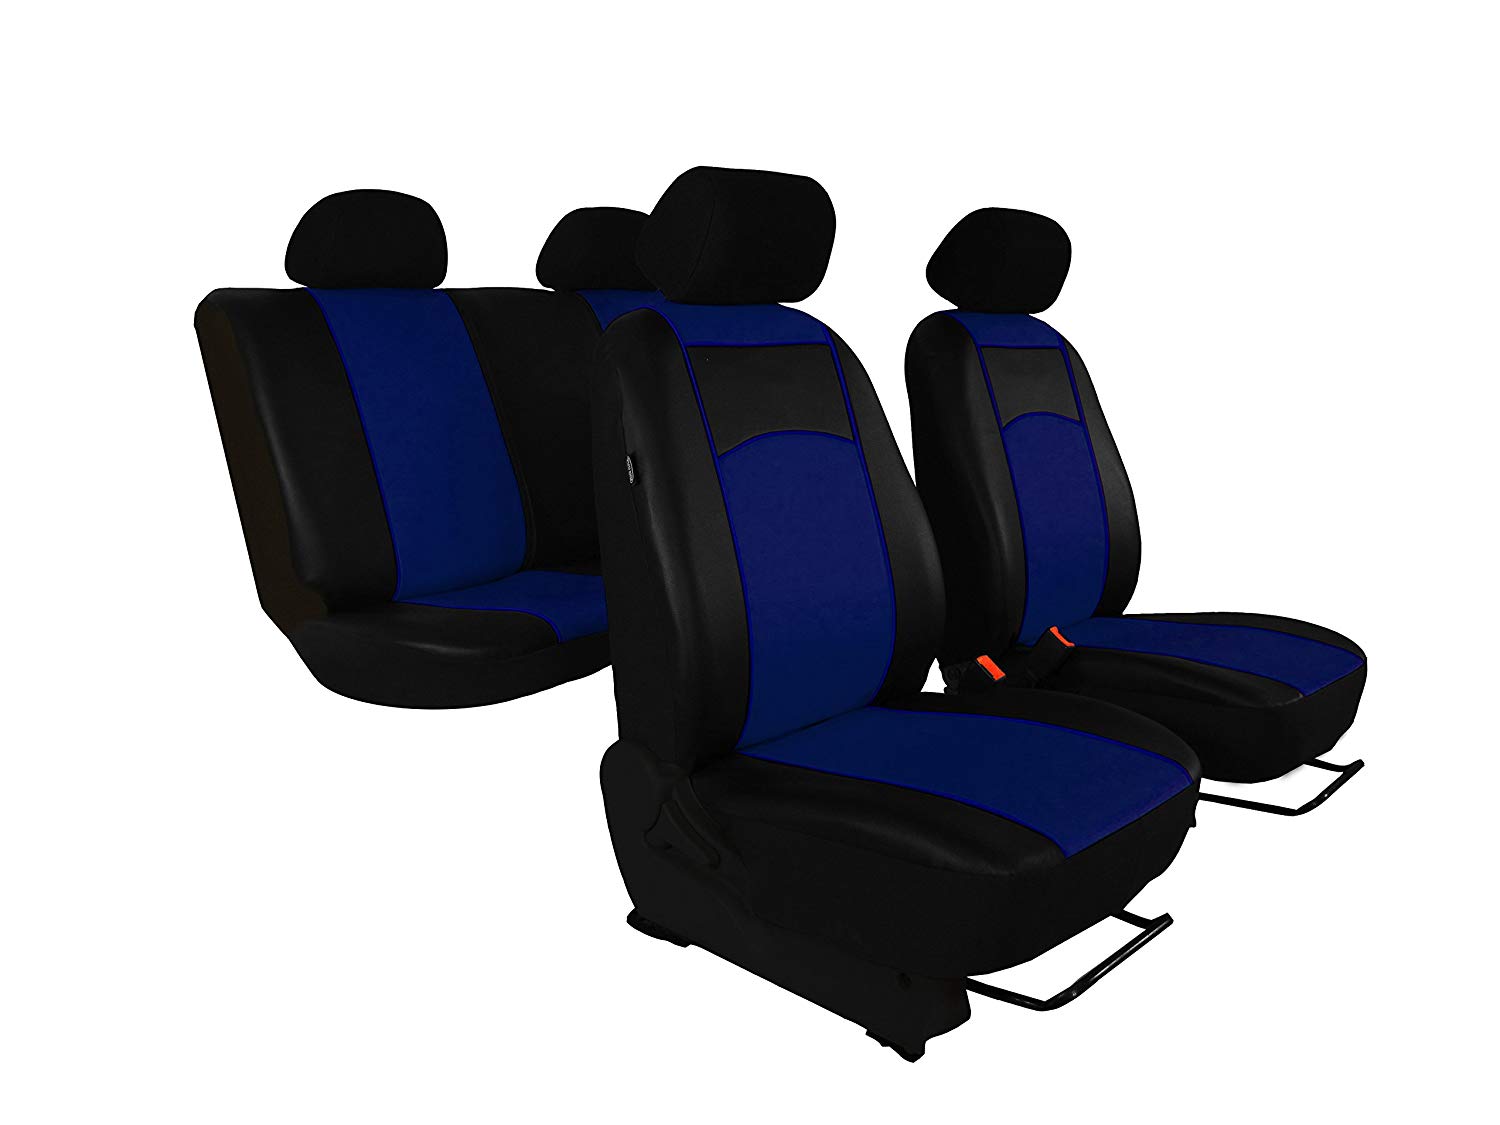 &apos;Universal Imitation Leather Seat Cover Set for Civic VII Design Faux Leather with Decorative Tuning. In This listing. Blue.